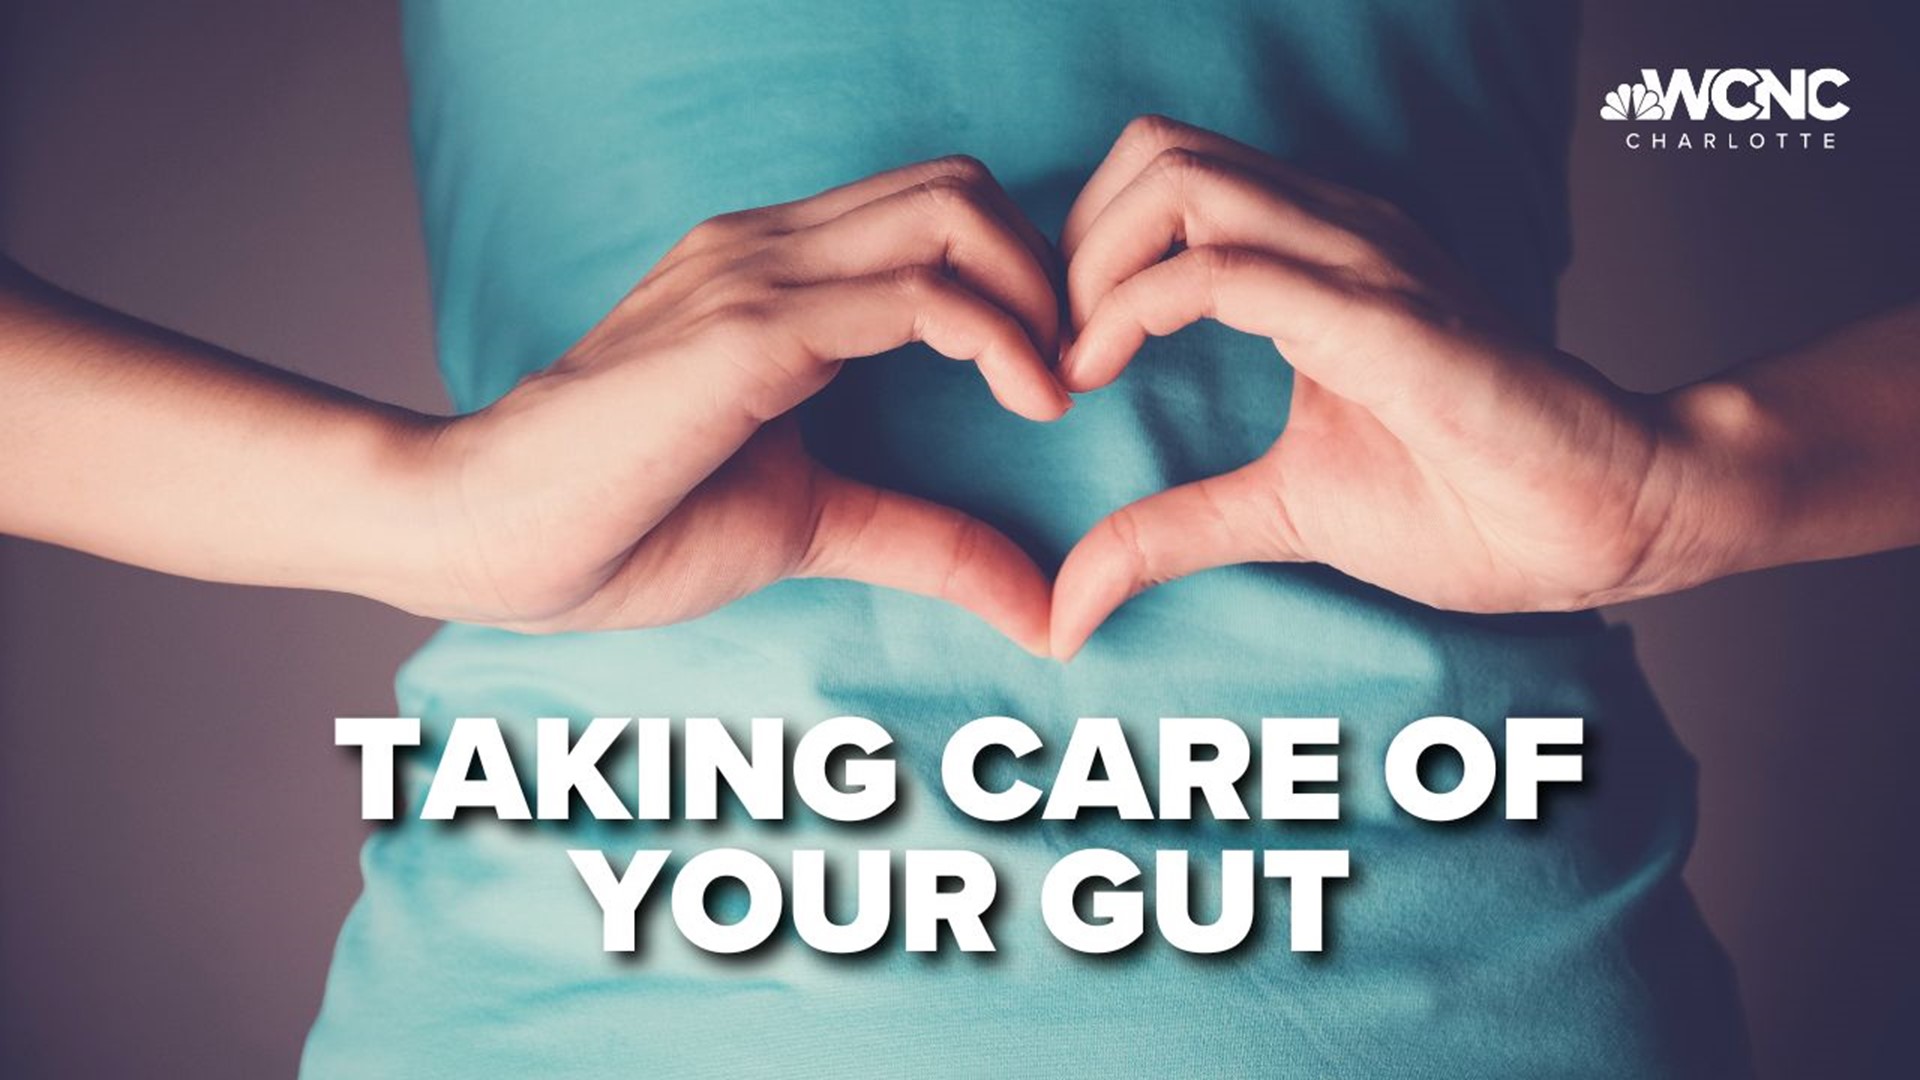 A new study shows most Americans don't know how to look after their gut health.